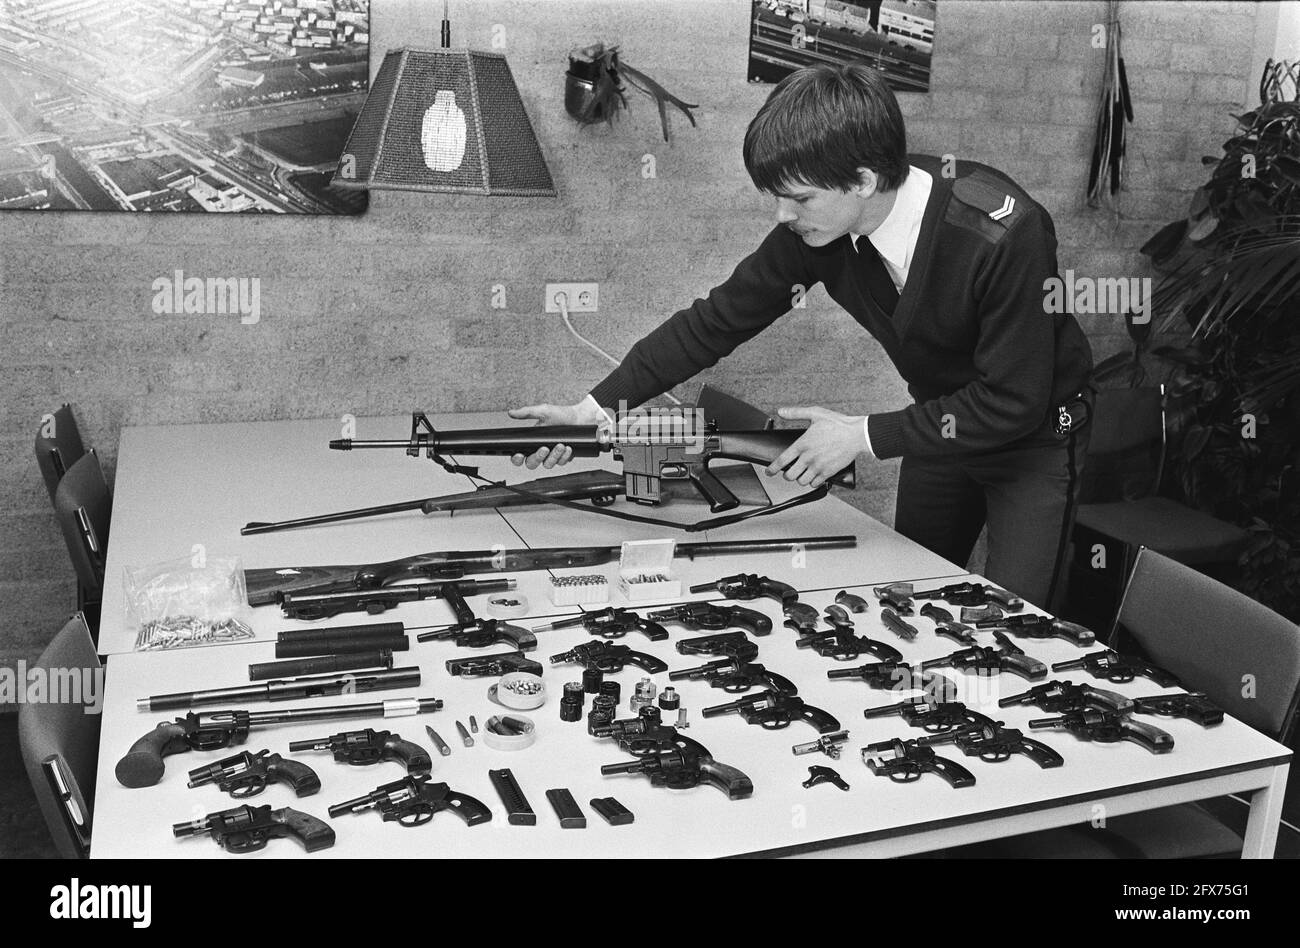 Illegal Weapons Factory In Diemen Rolled Up And Large Amount Of Weapons